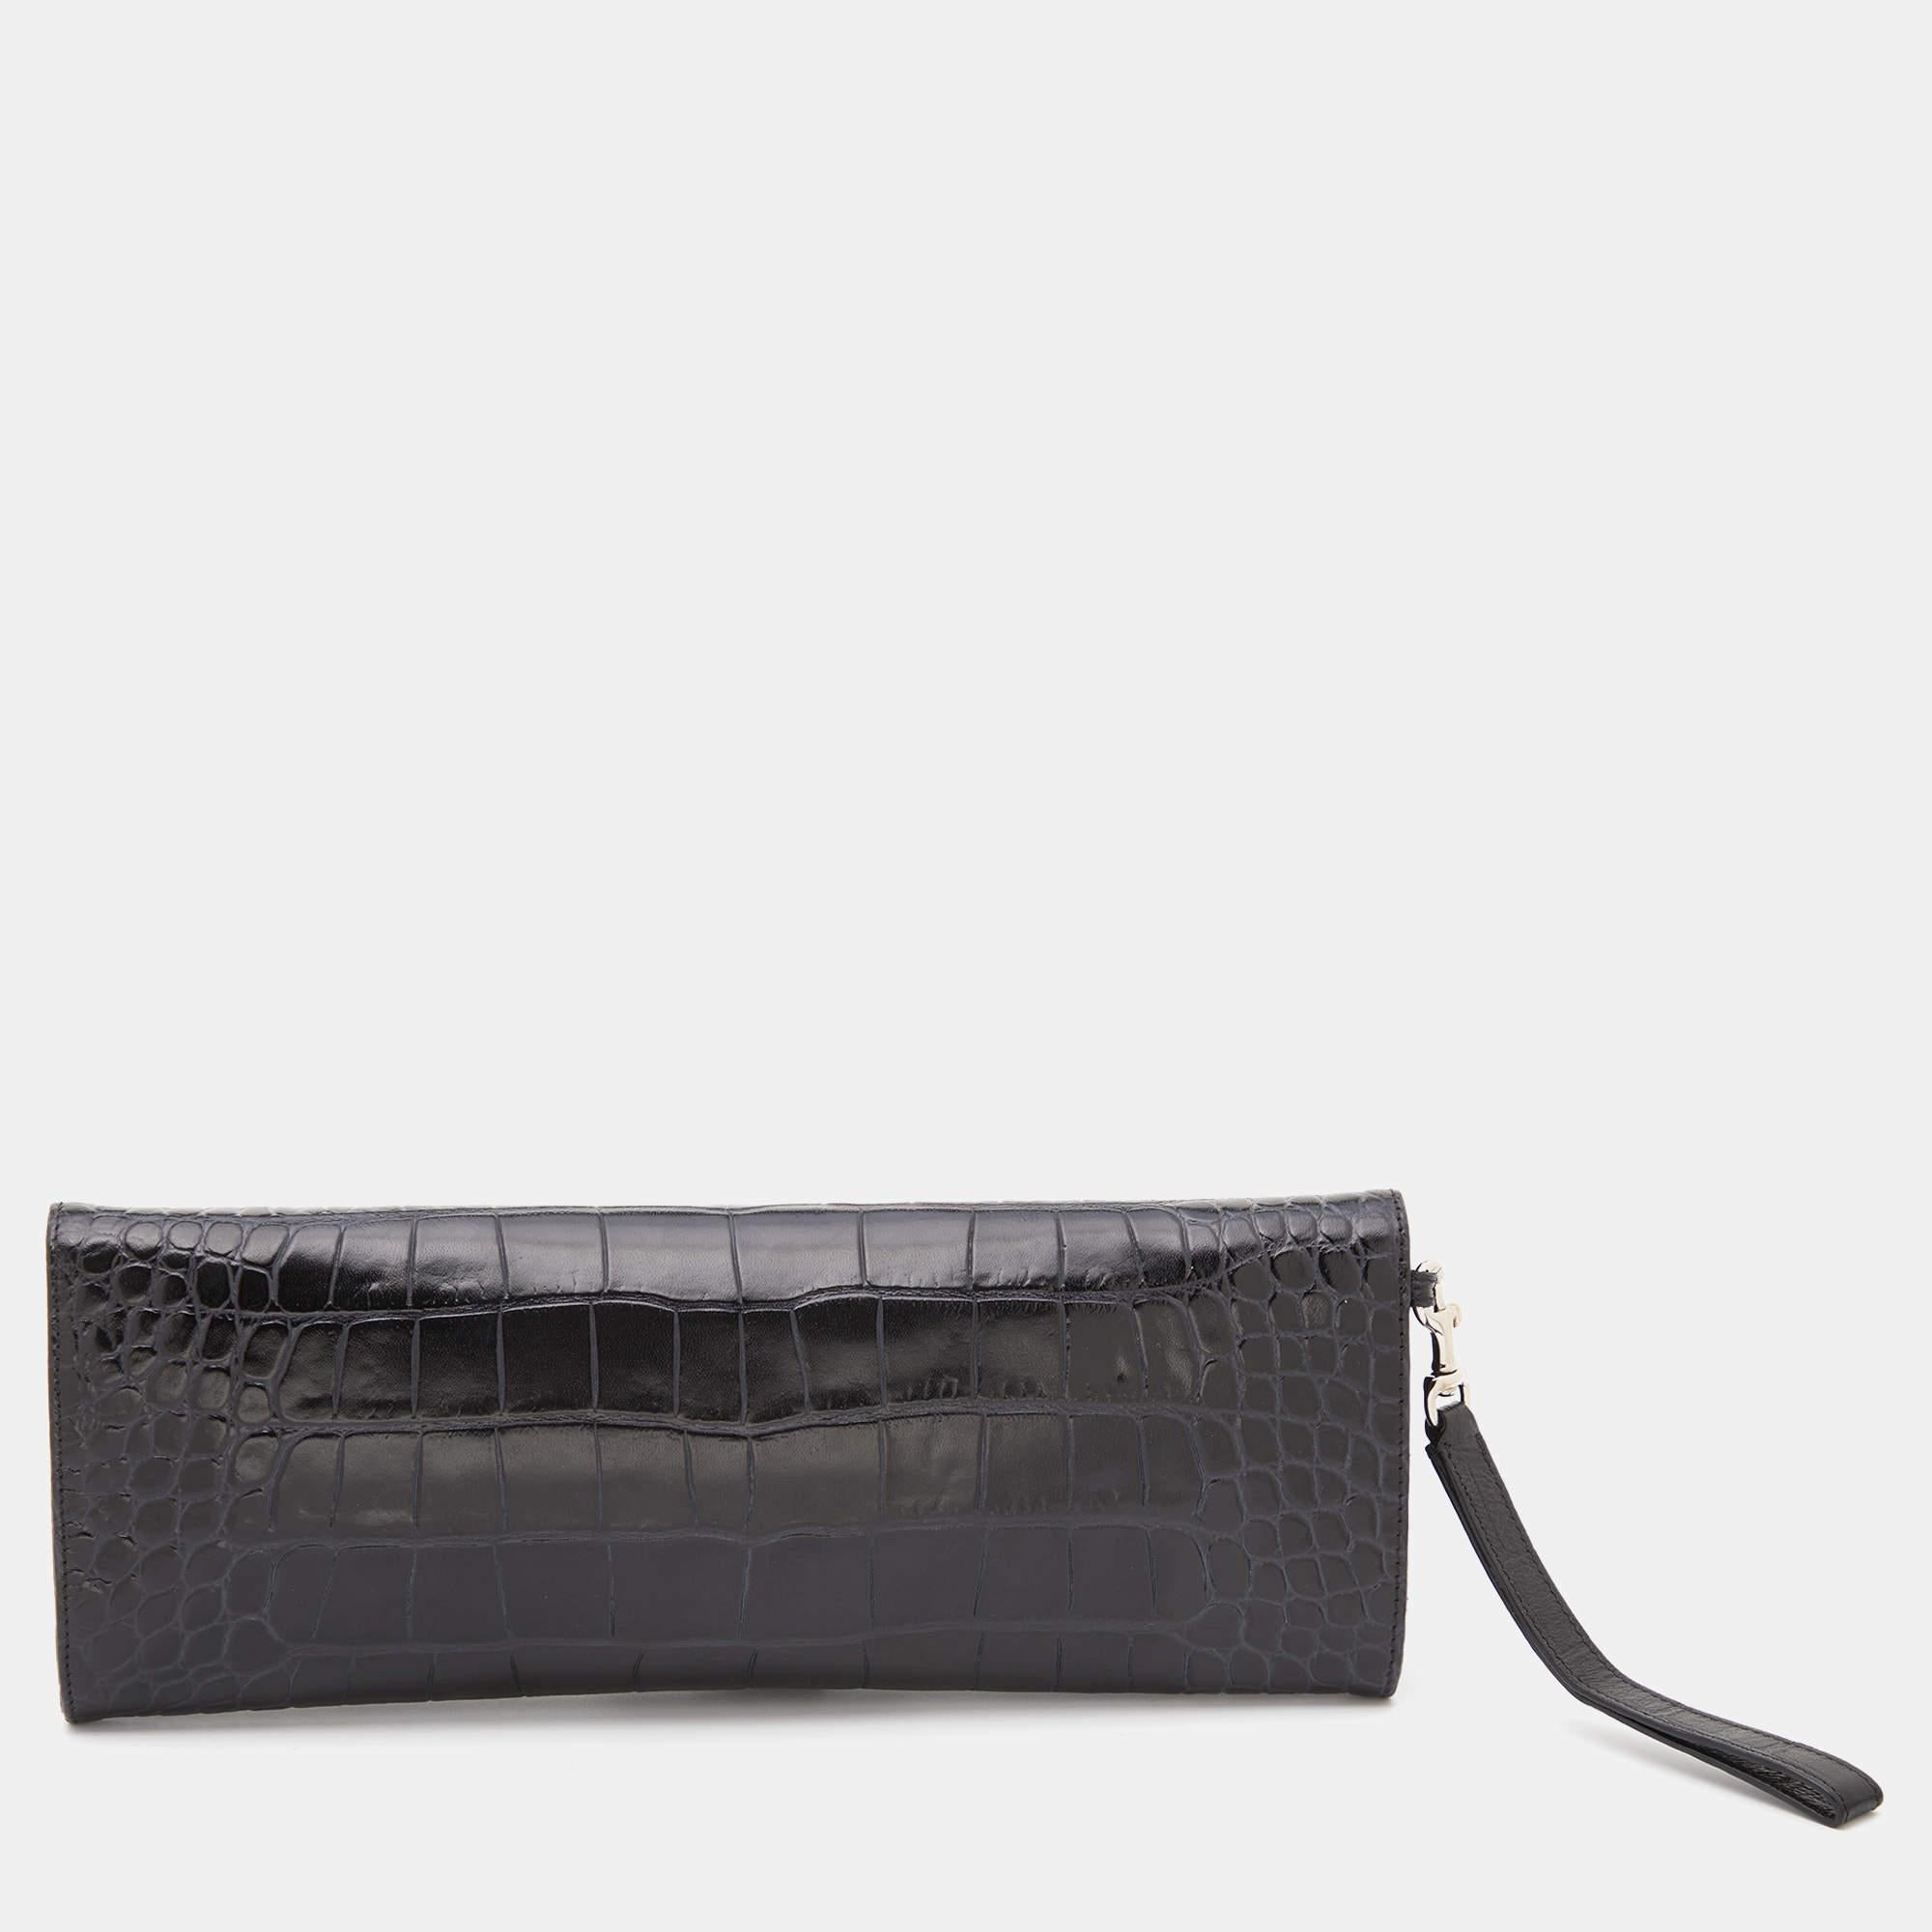 Givenchy Black Croc Embossed Leather Shark Tooth Long Wristlet Clutch In Good Condition In Dubai, Al Qouz 2